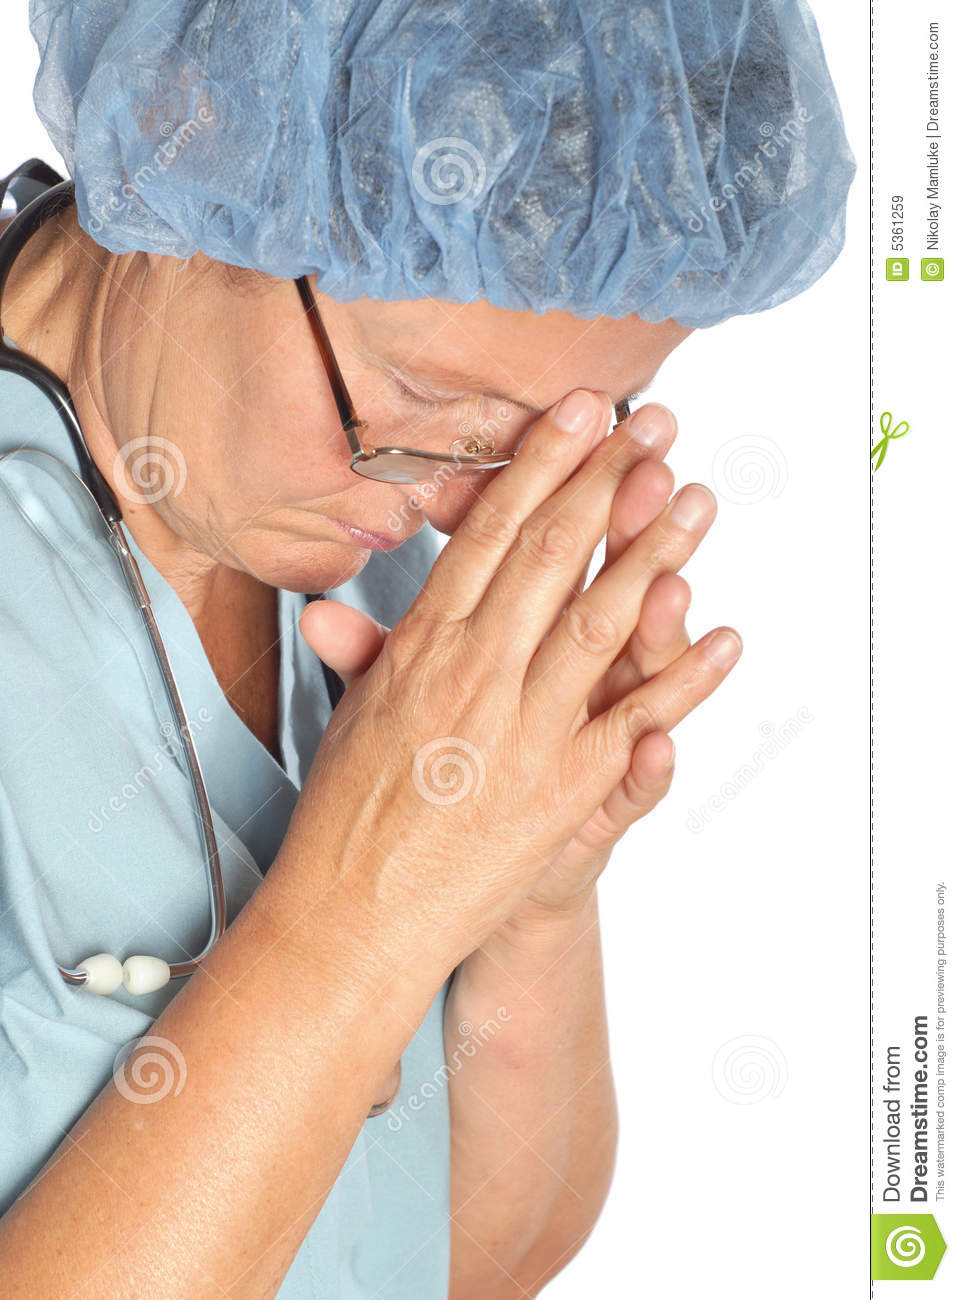 Exhausted Nurse Royalty Free Stock Images   Image  5361259